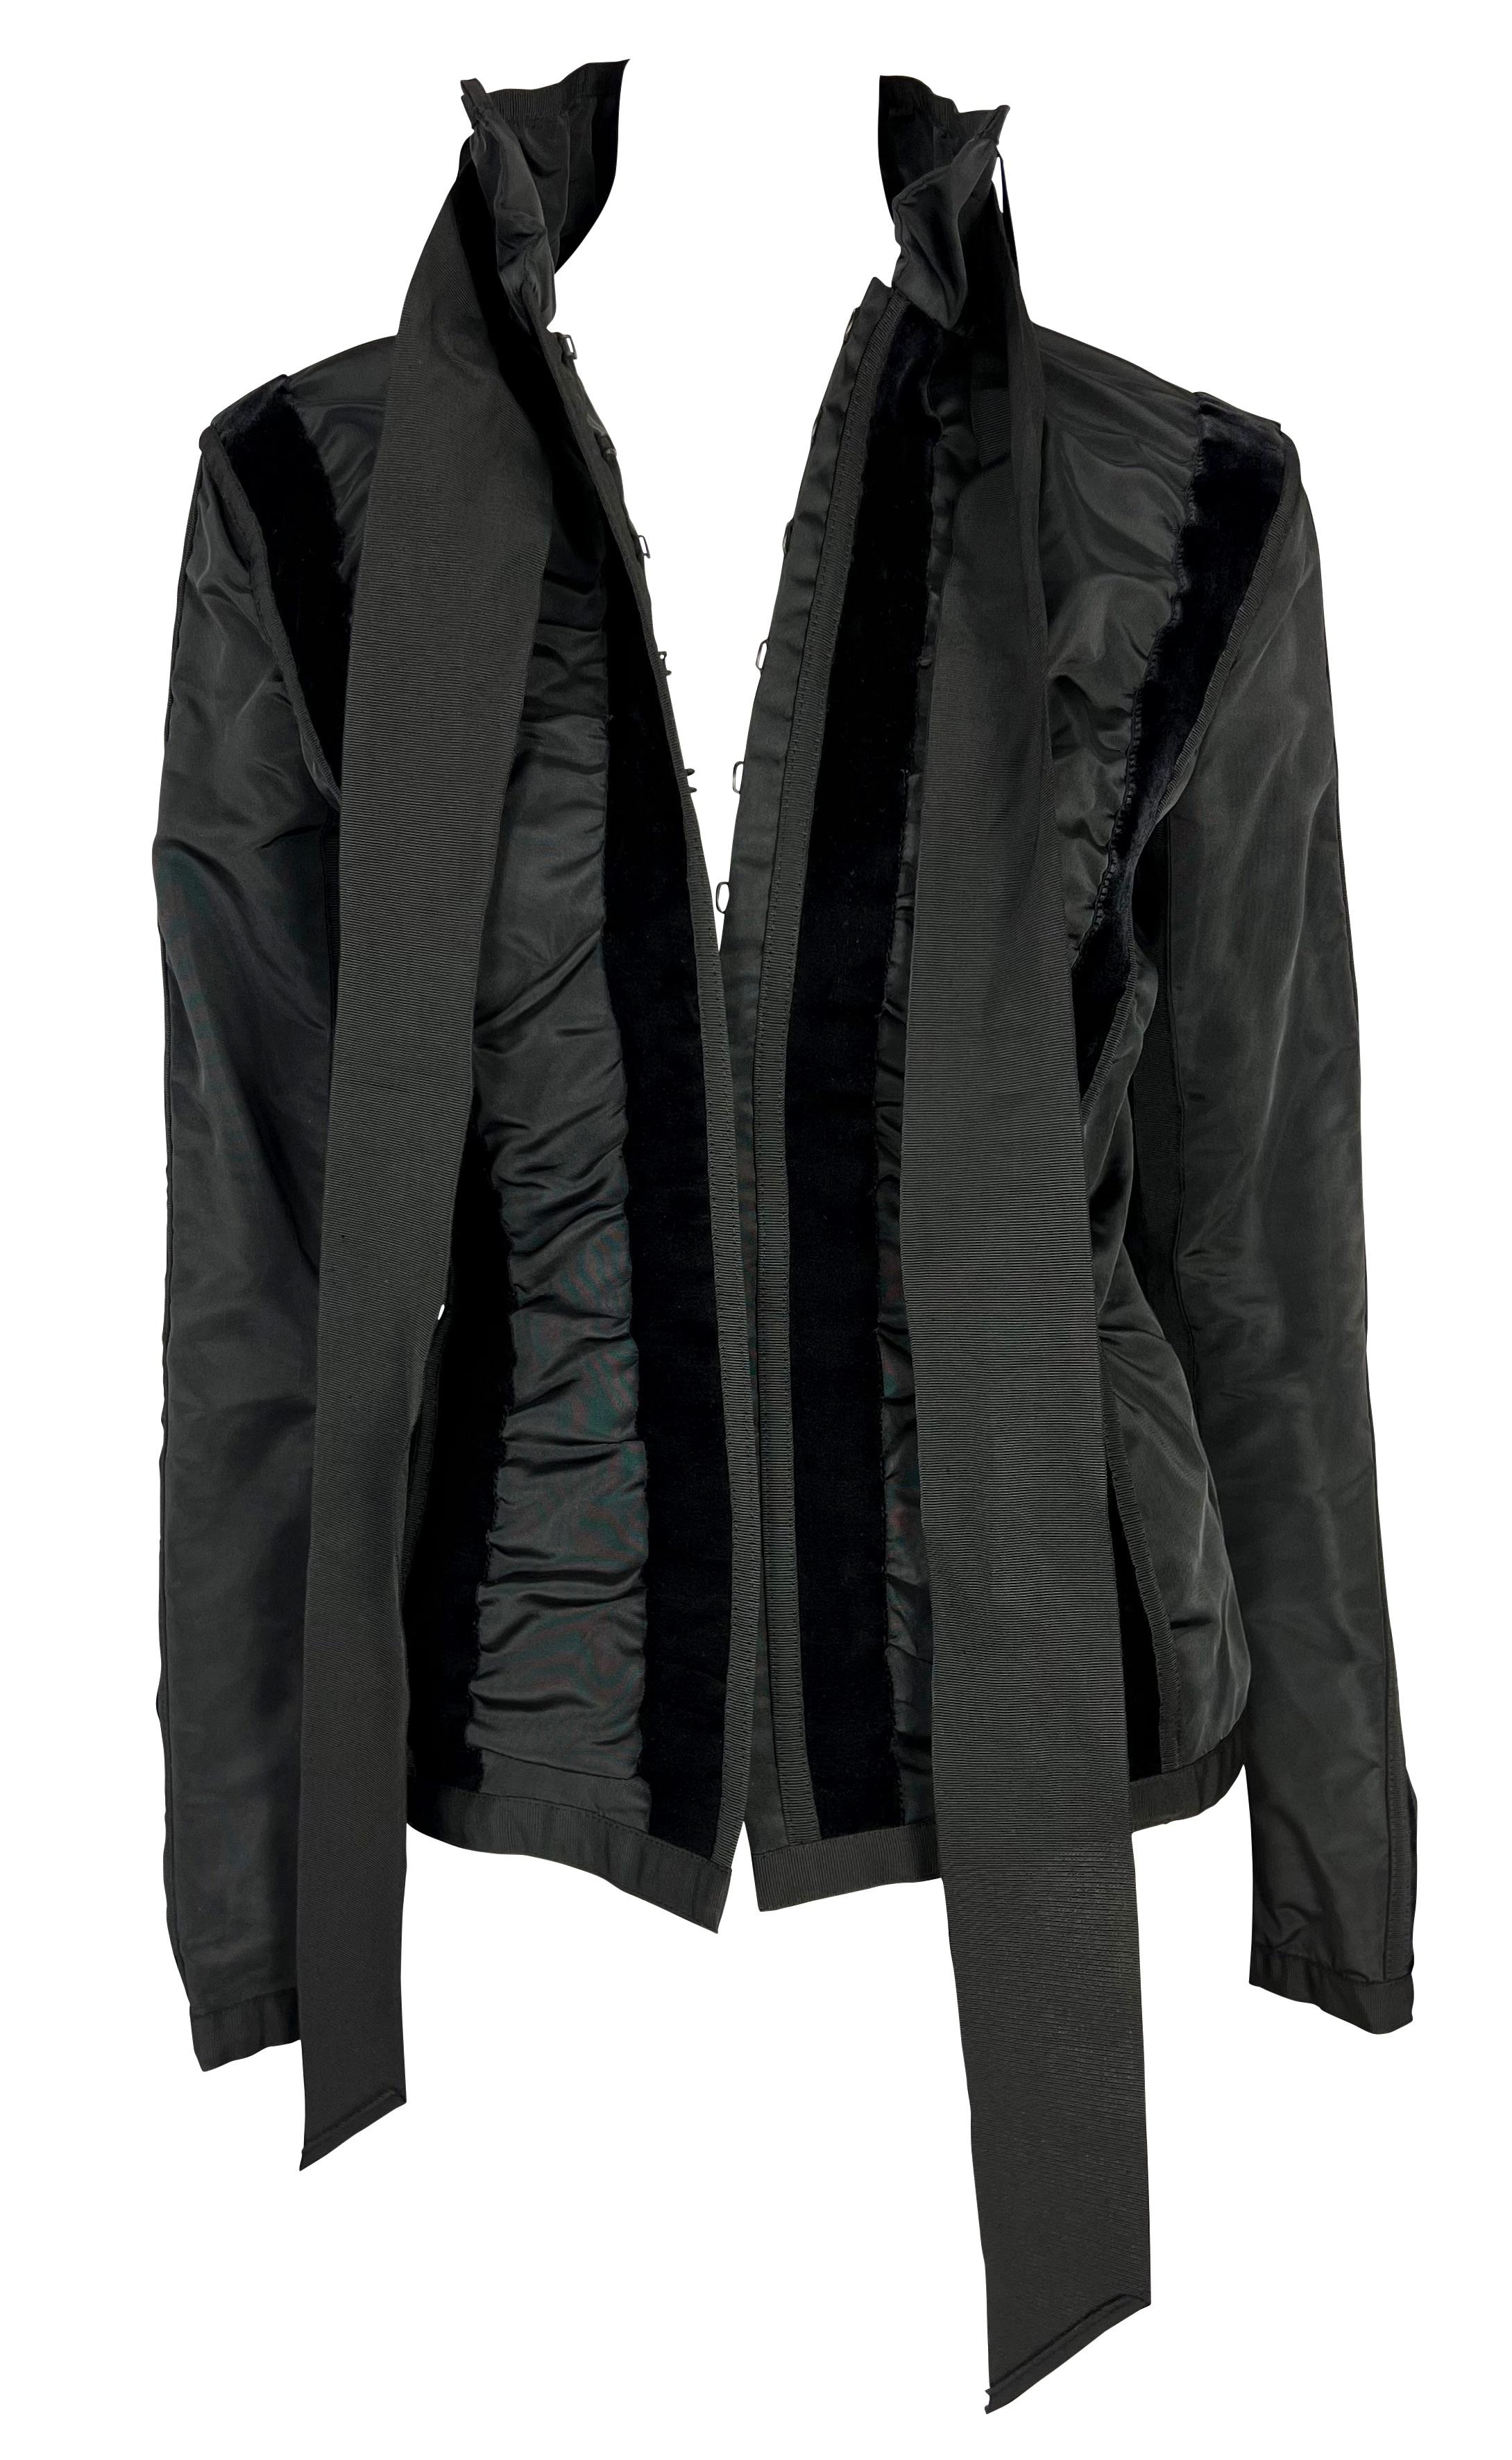 Presenting a black ruffled and velvet Yves Saint Laurent Rive Gauche jacket, designed by Tom Ford. From the Fall/Winter 2002 collection, this versatile jacket features ruffled panels throughout separated by vertical strips of velvet. The jacket is